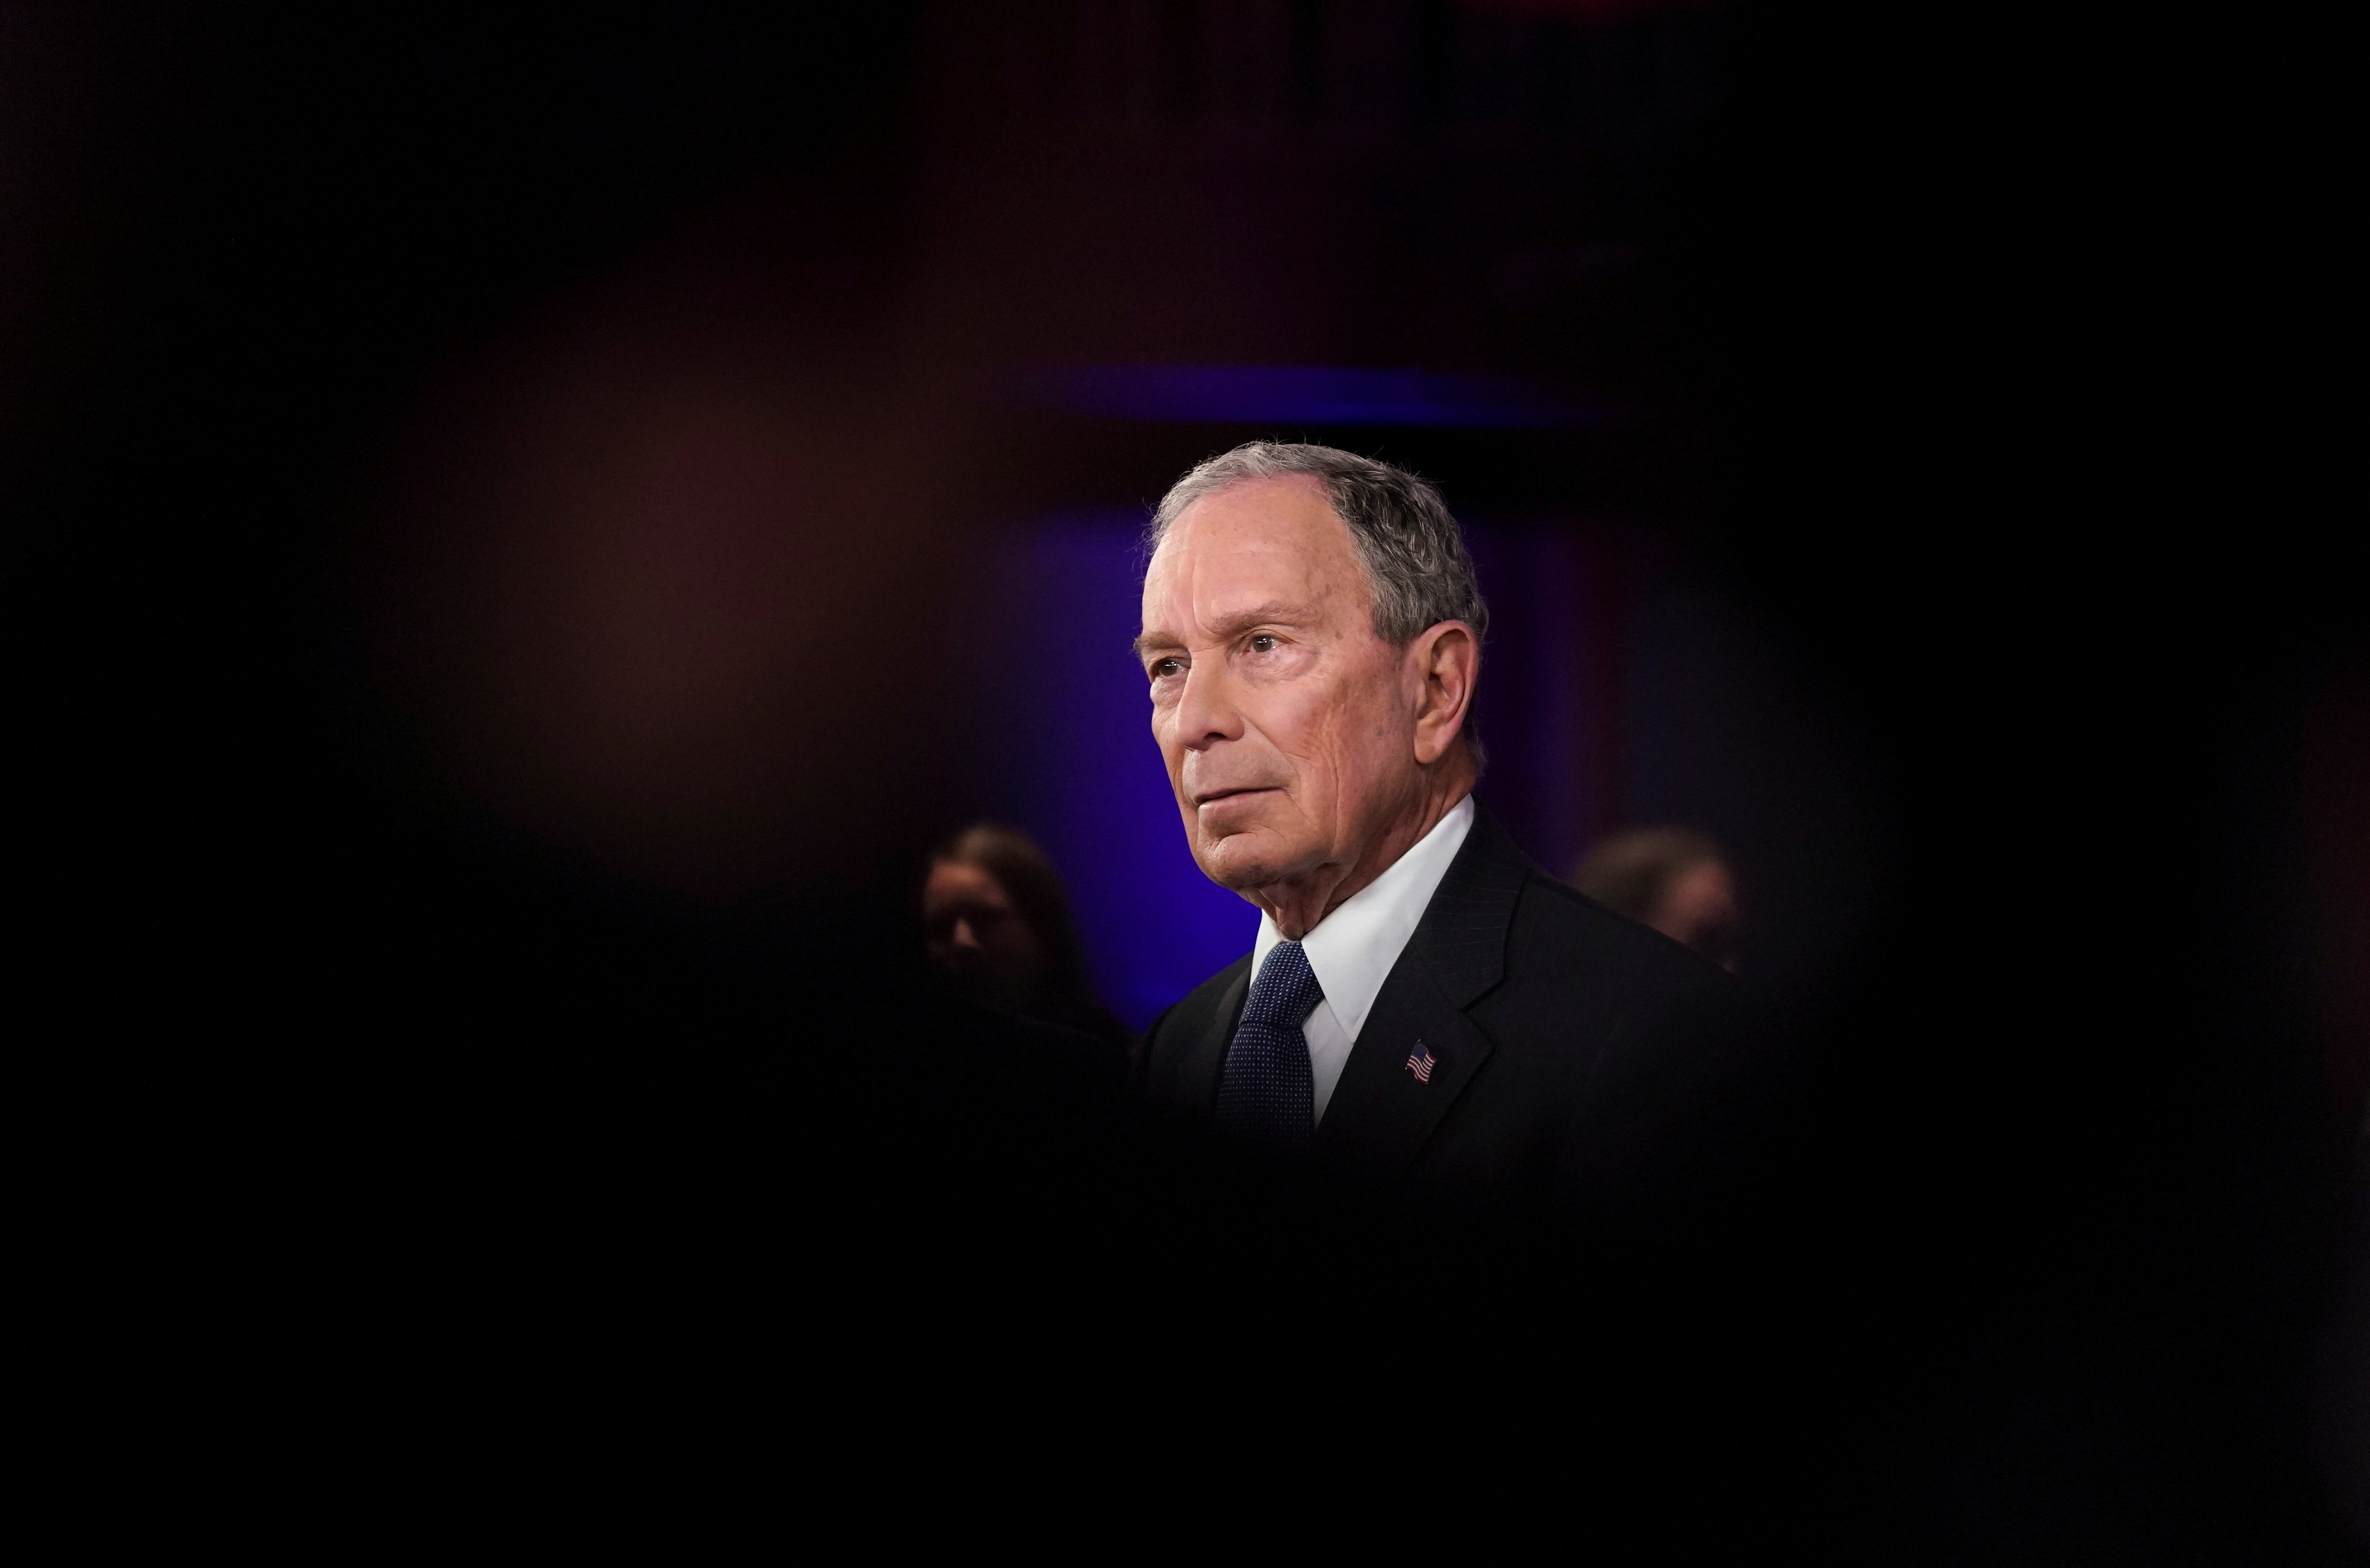 Democratic presidential contender Michael Bloomberg at a town hall in Manassas, Virginia